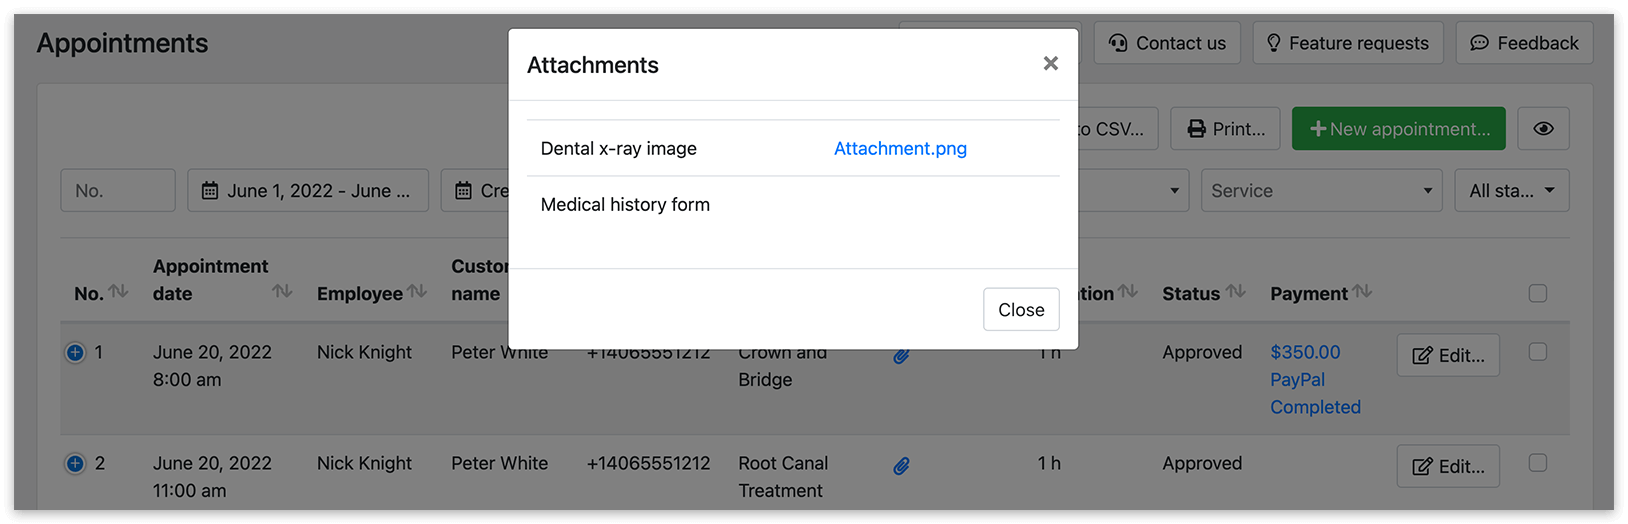 Attachment details in Bookly